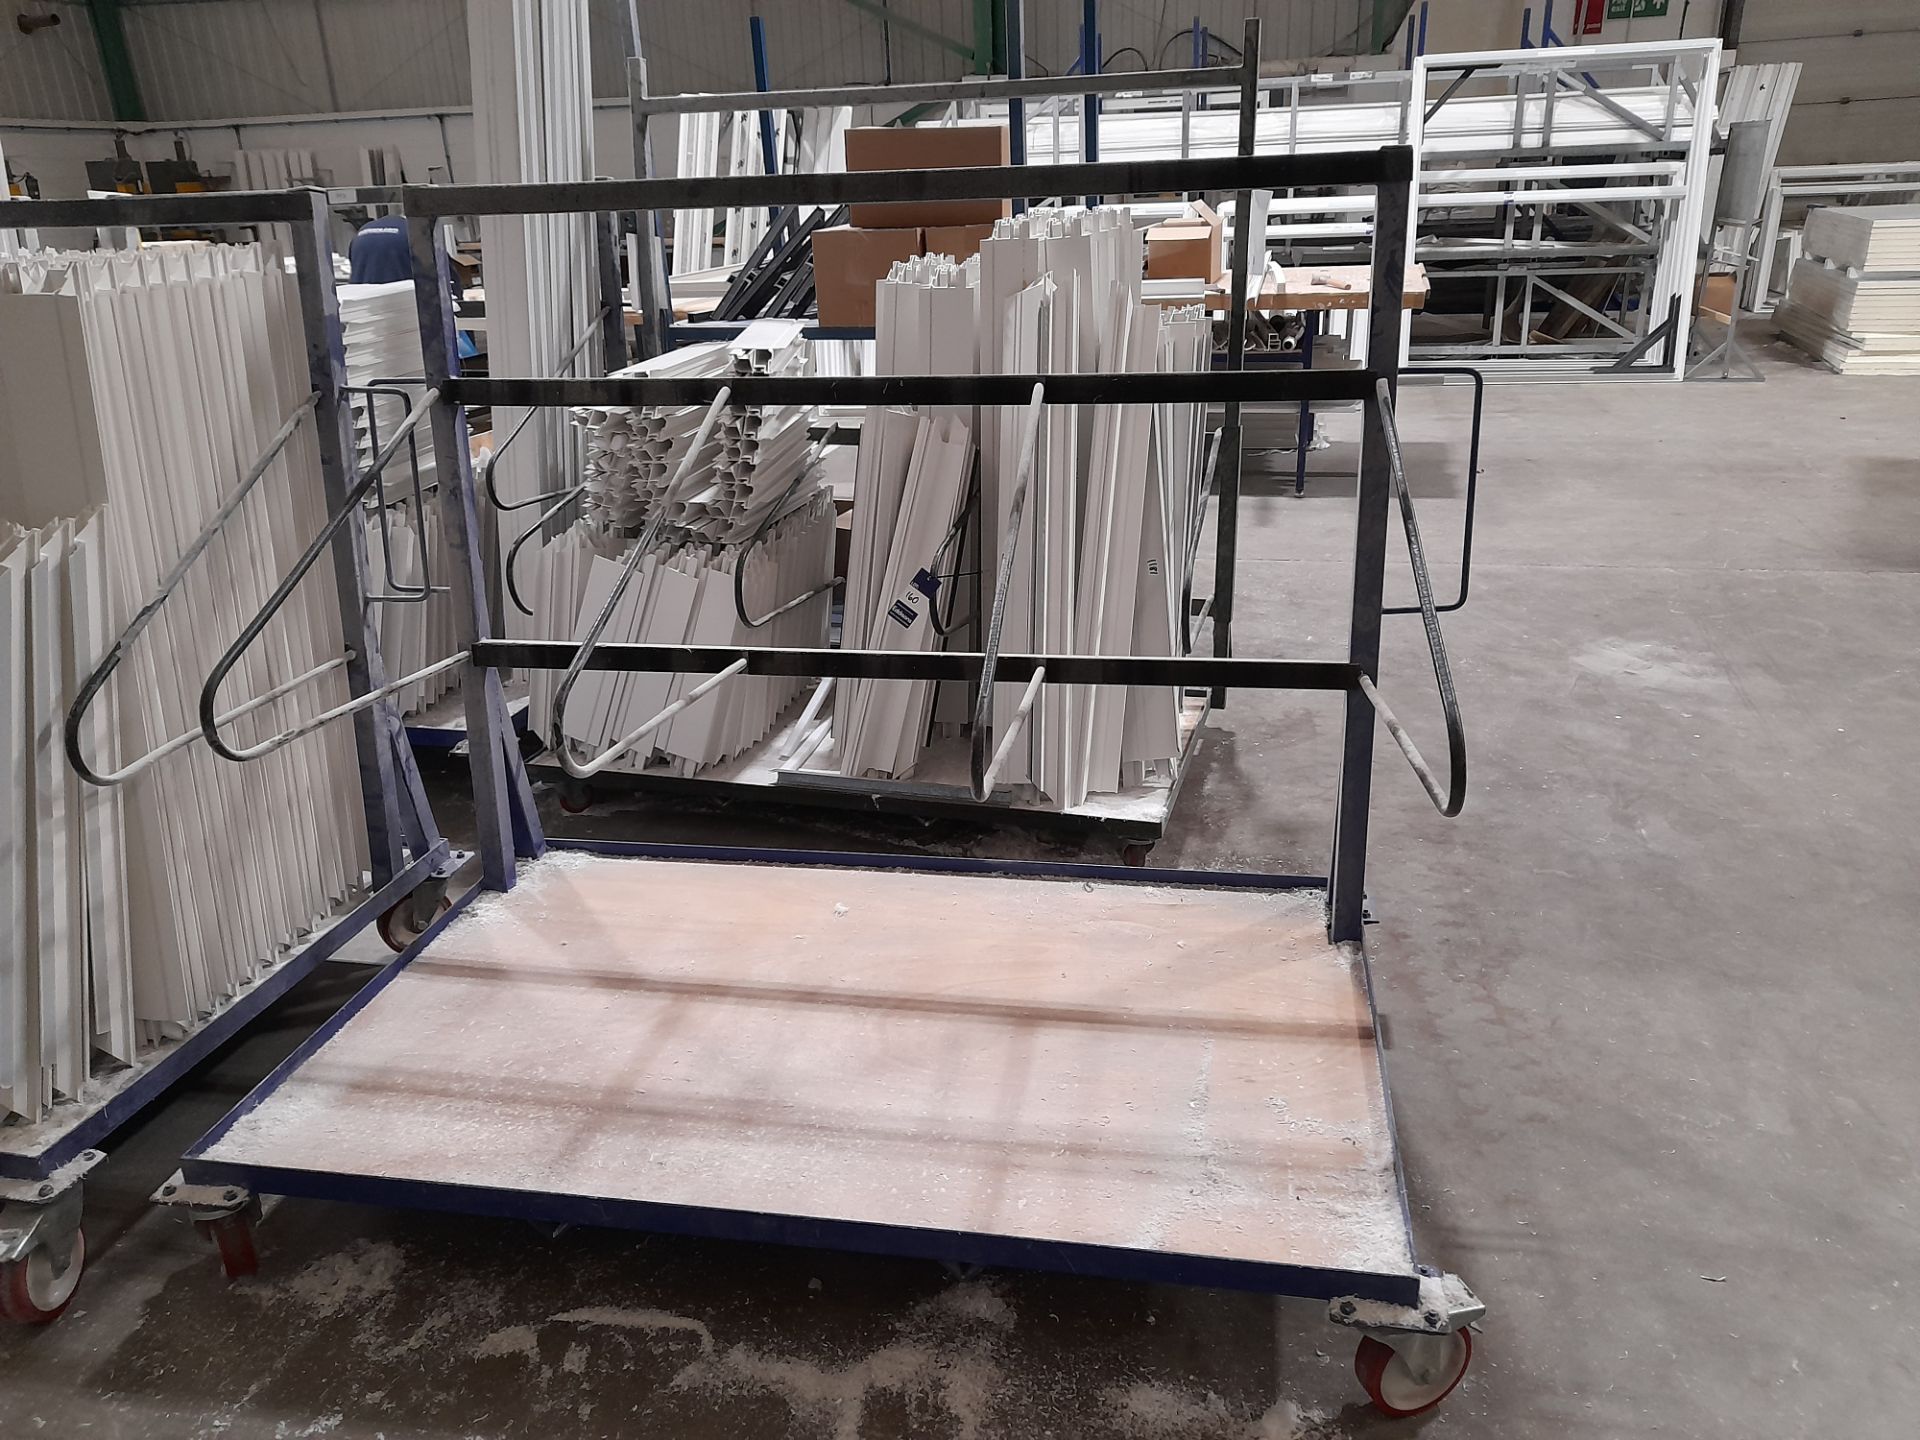 3 x Sheet stock trollies (Contents not included)